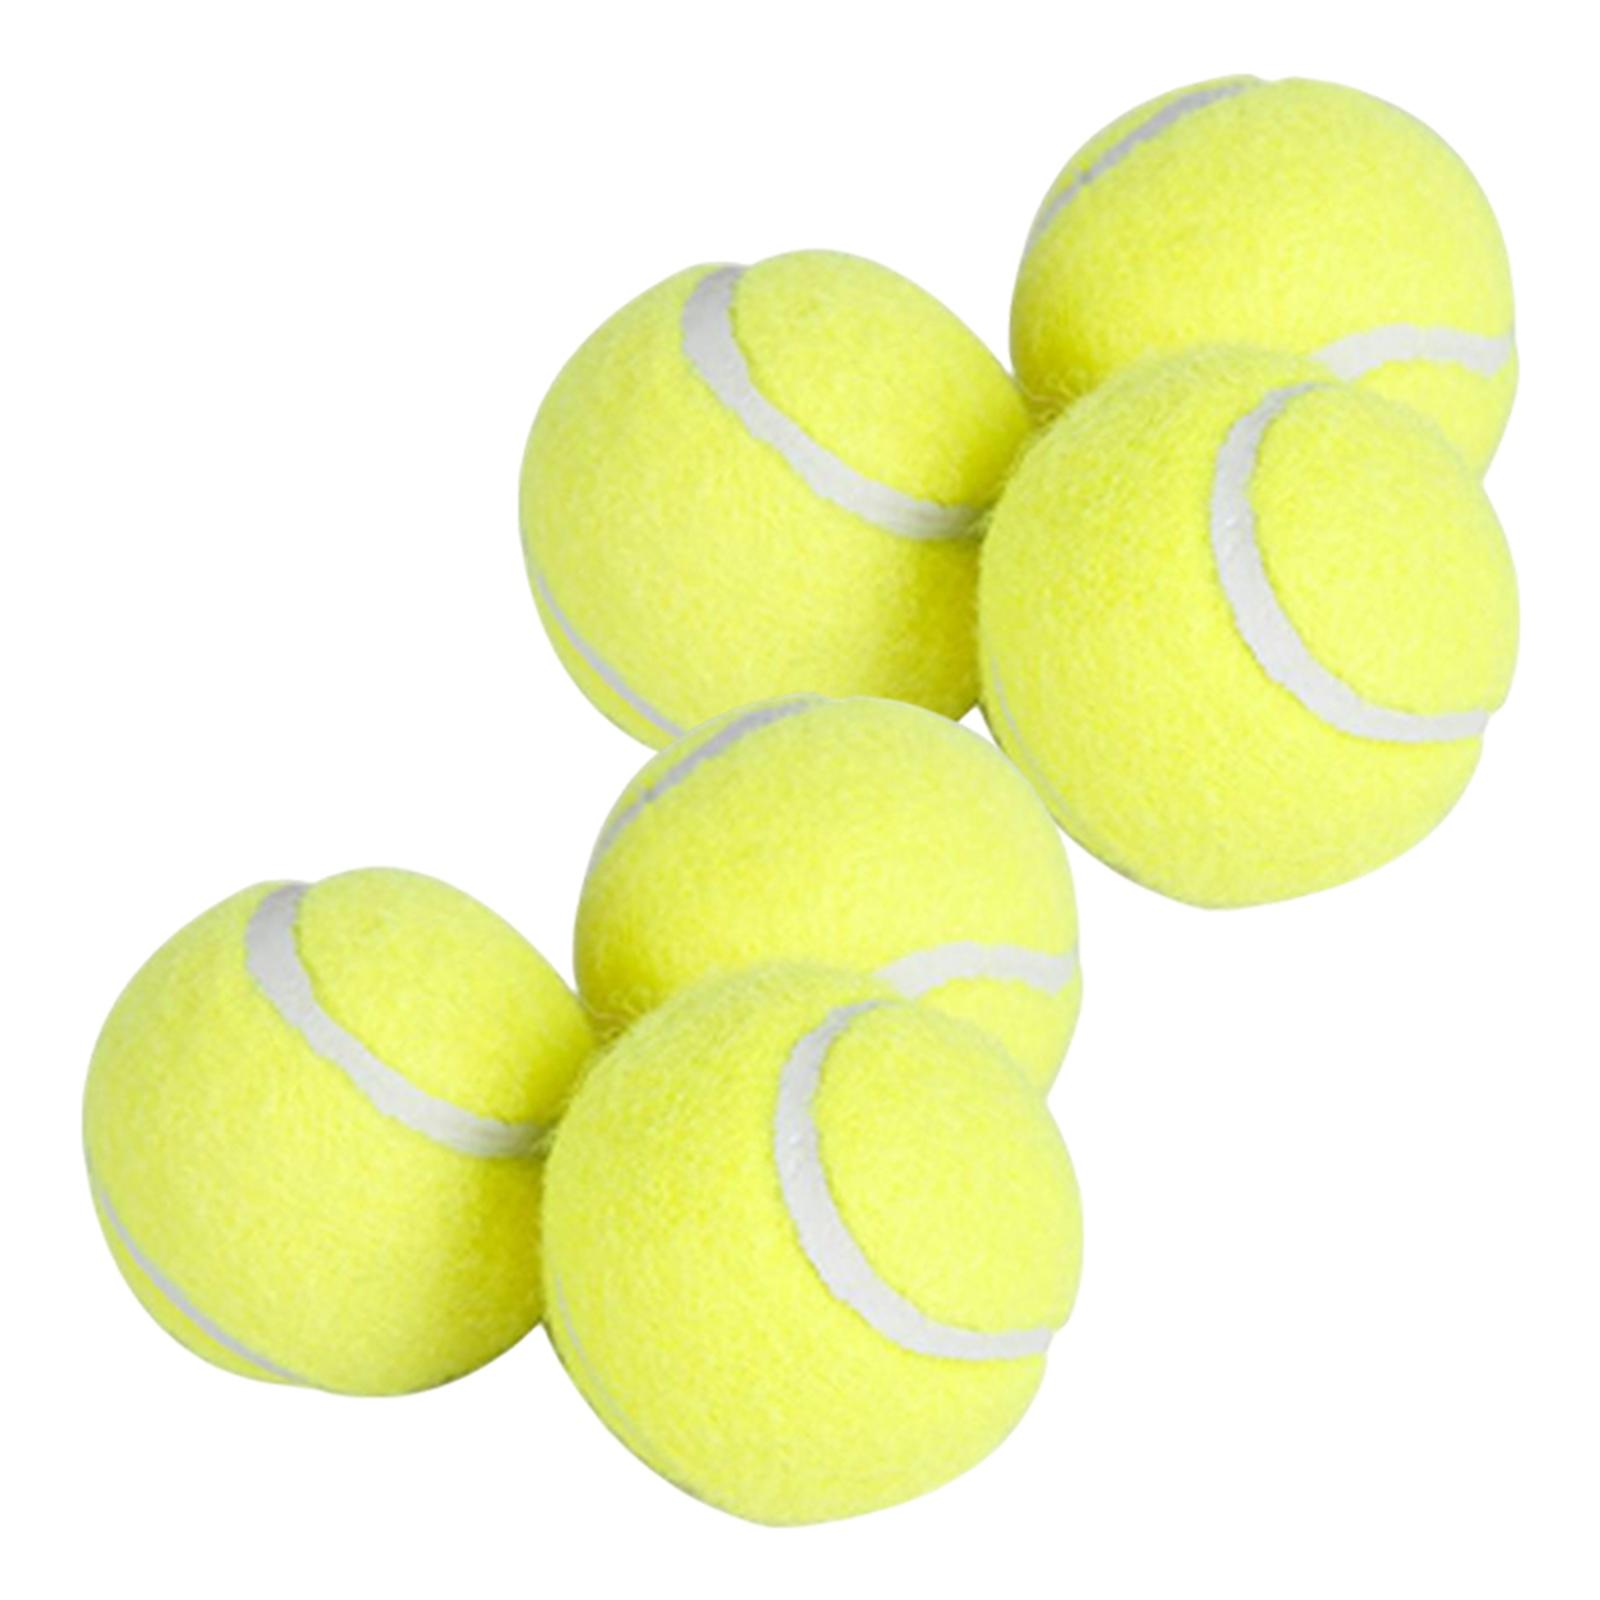 IkHigh-Bounce-Practice-Training-for-Dogs-Outdoor-Elasticity-Durable-Tennis-for-Bite-Chase-and-Chomp-5cm.jpg_ (1)